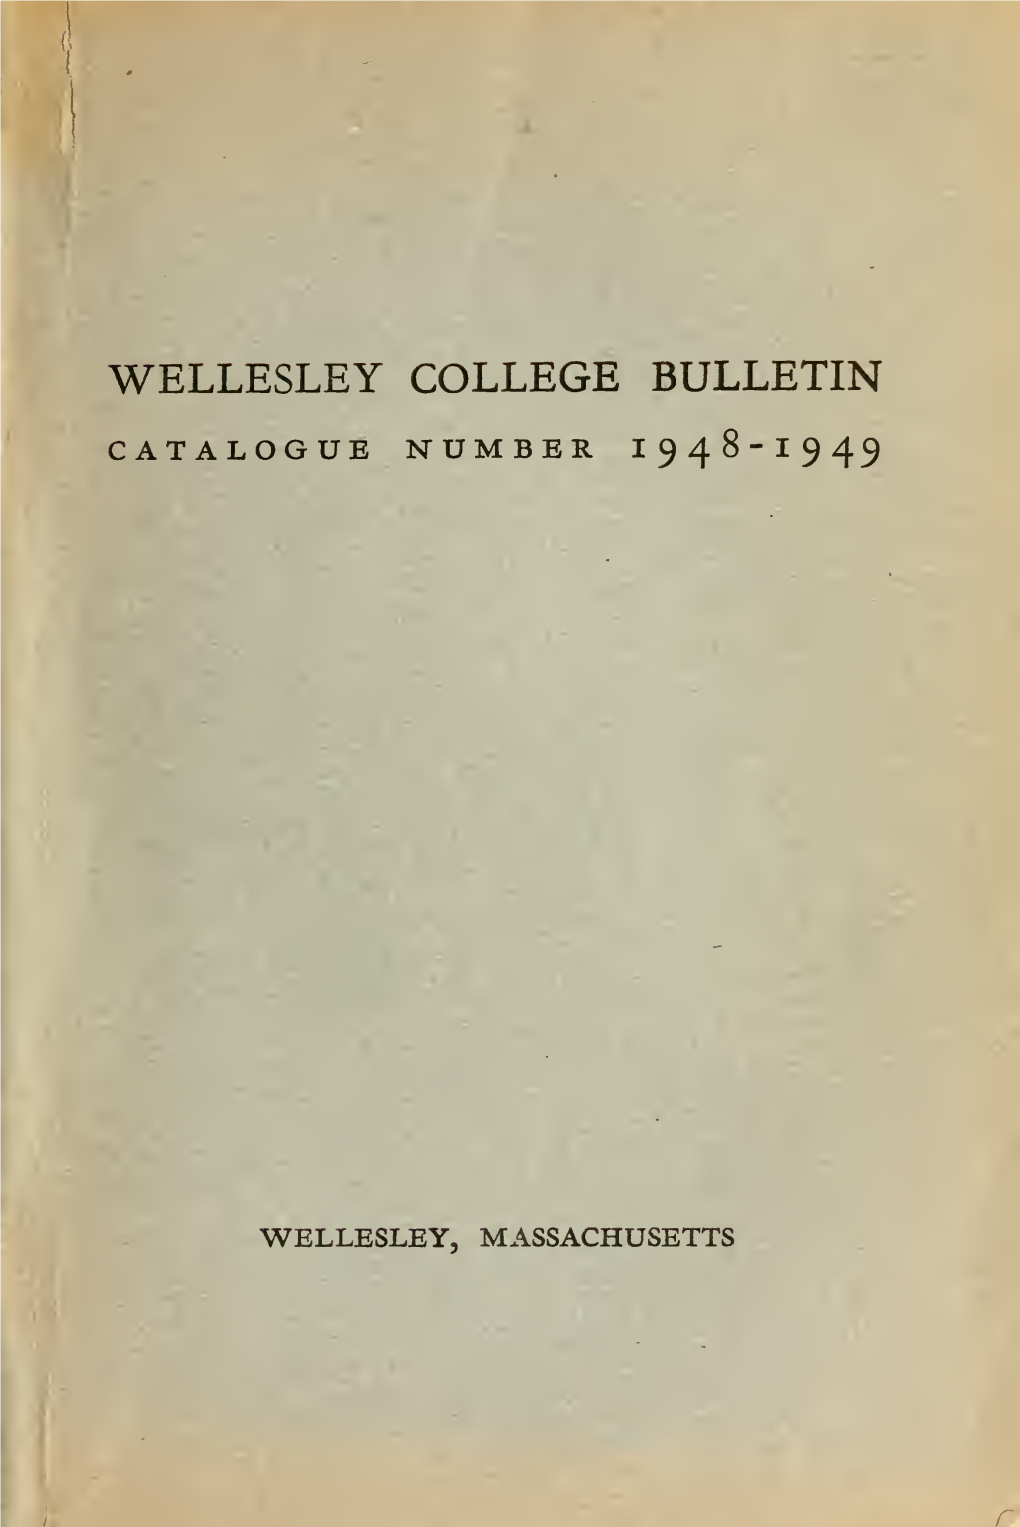 Catalogue Number [Of the Bulletin]